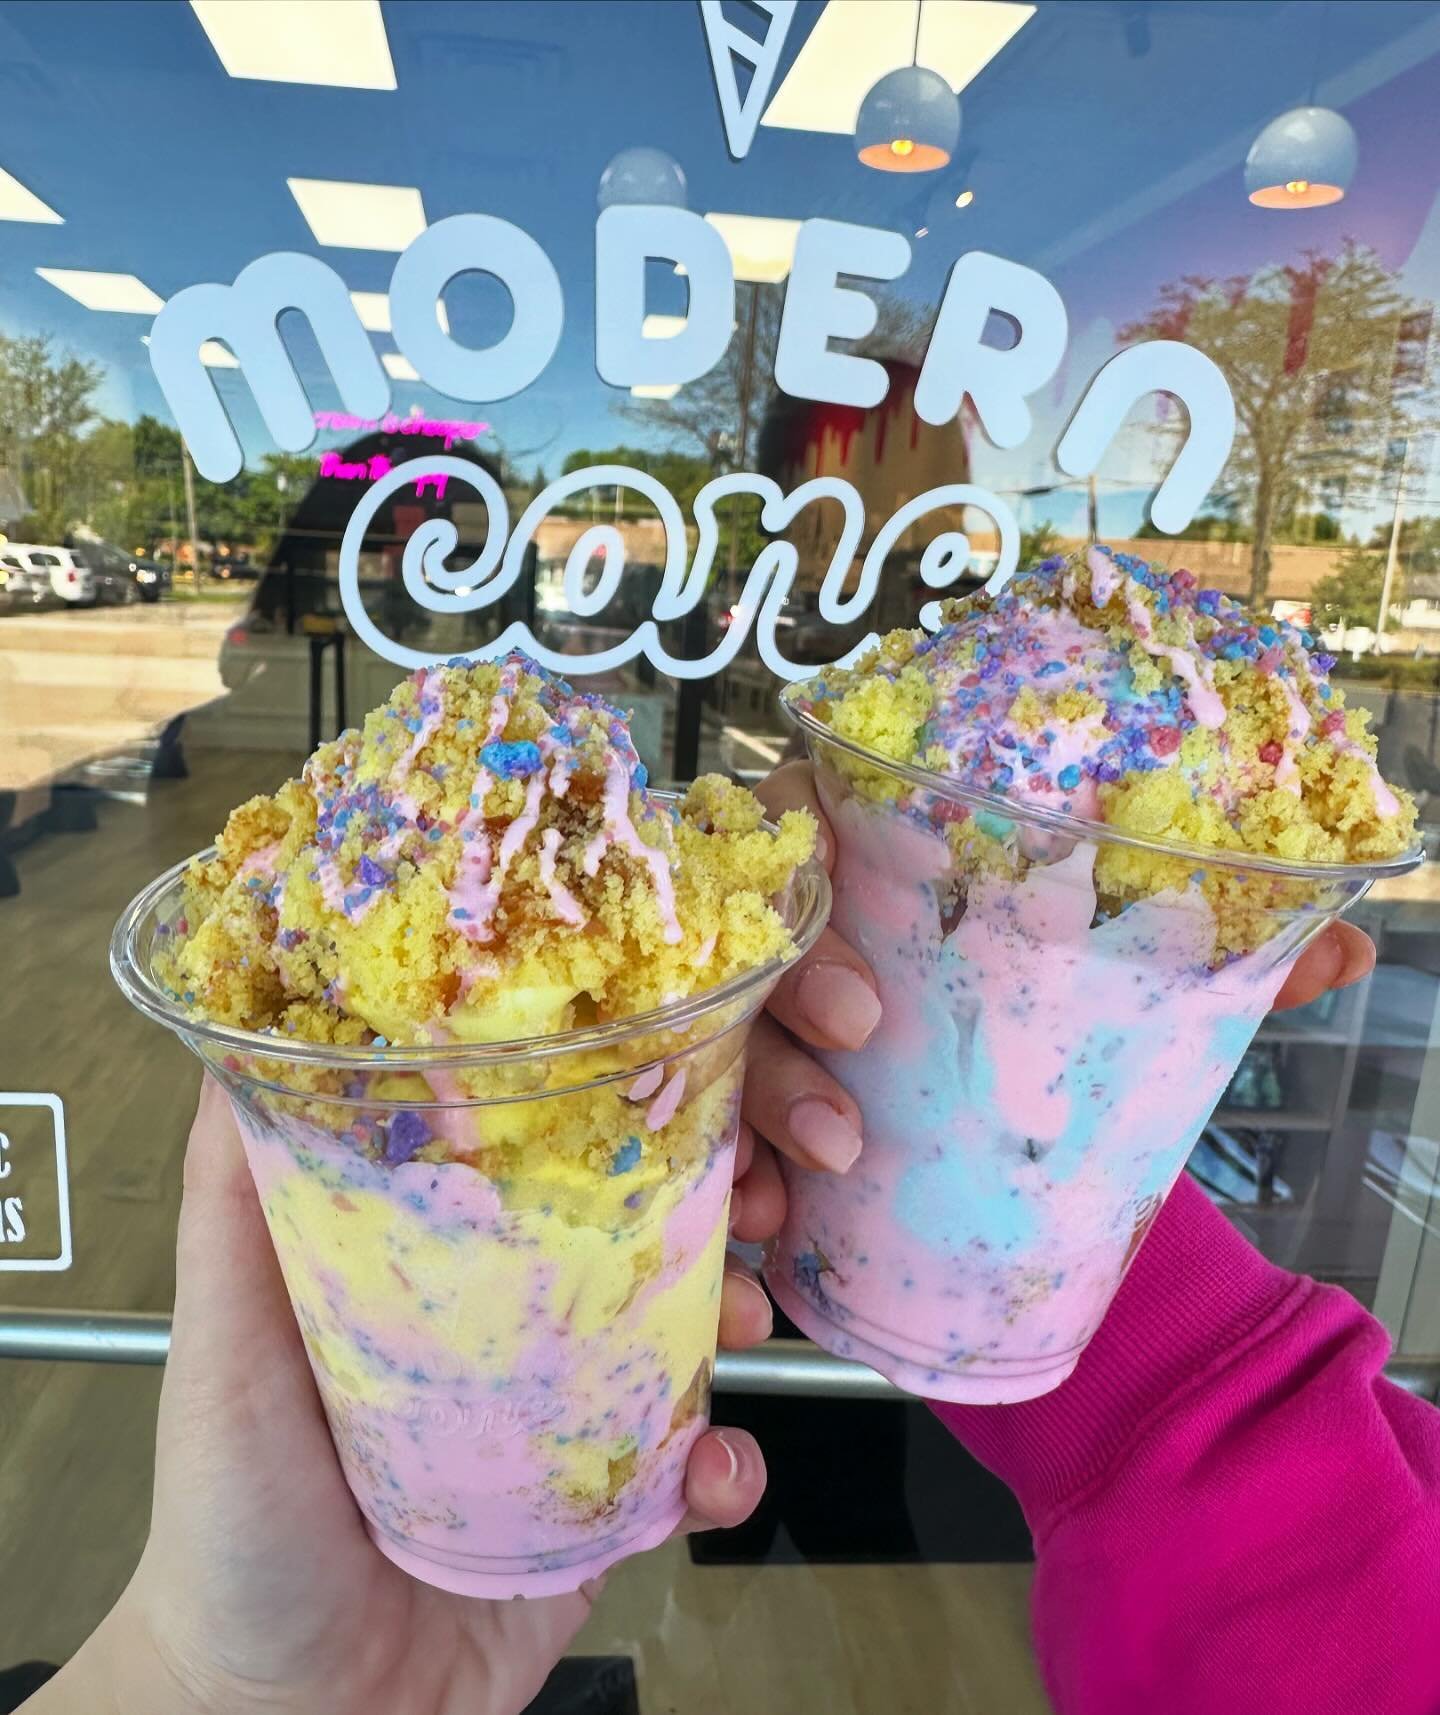 COTTON CANDY STACKER - here for a limited time!
📍@moderncone
🍦your choice of ice cream stacked with cotton candy sauce, cotton candy crunch and vanilla cake! 🍬